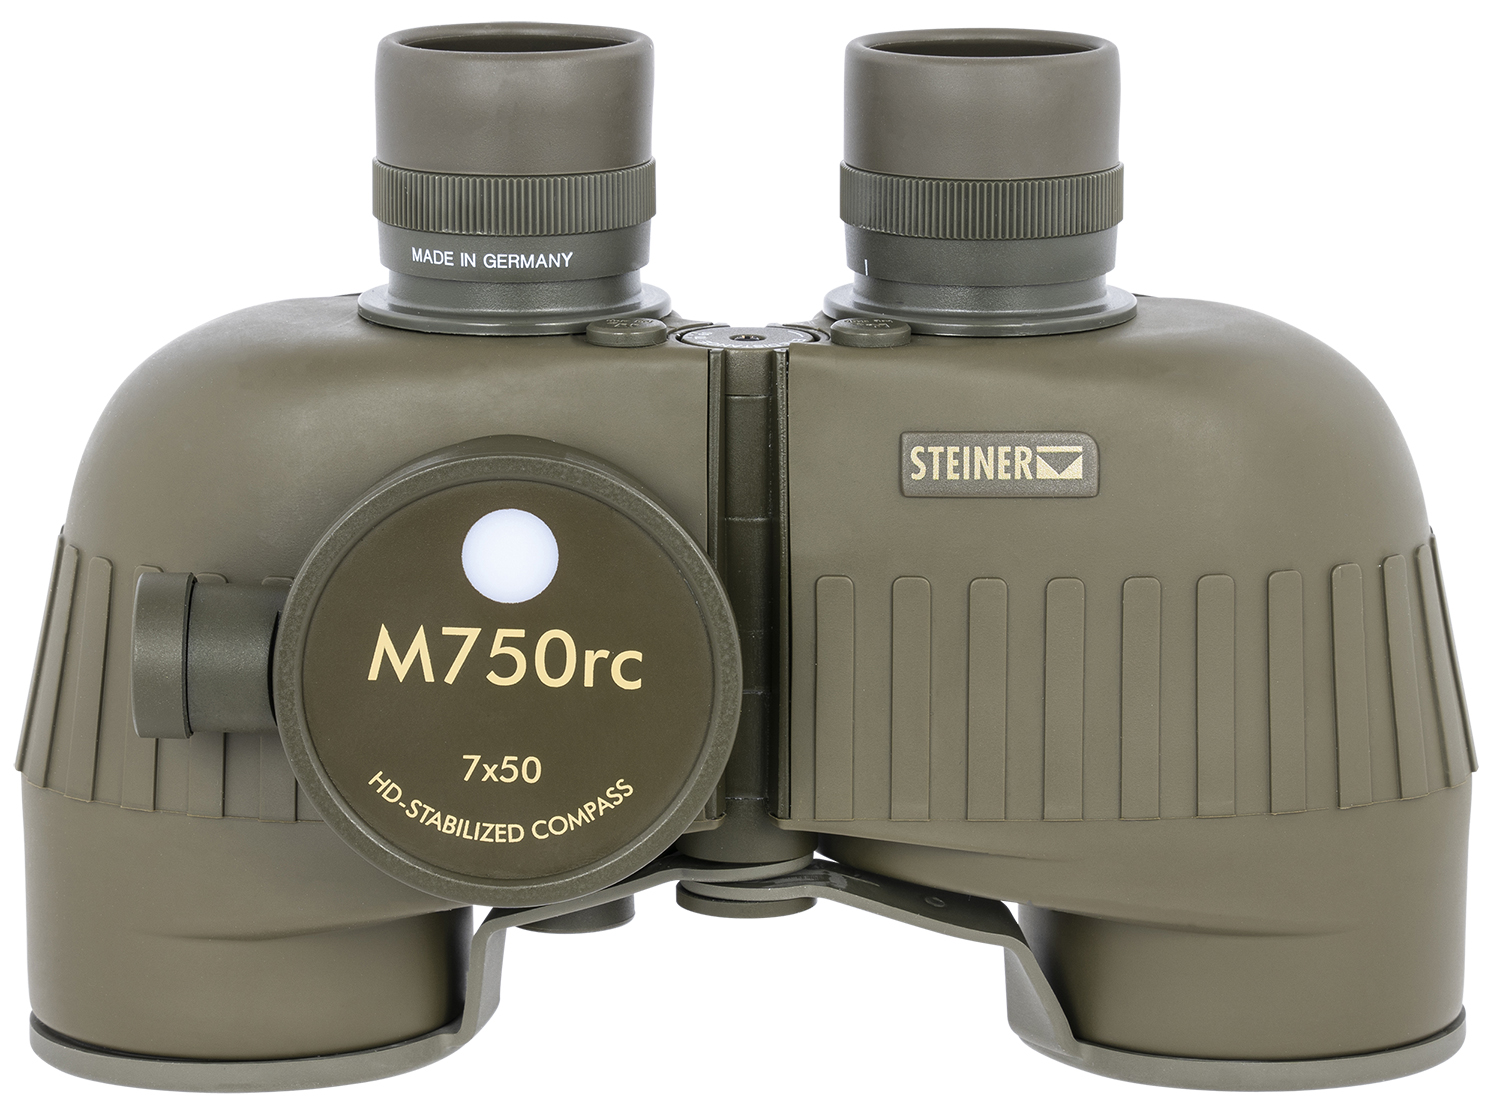 Steiner 2690 M750rc Reticle & Compass 7x50mm Range Finding Reticle Floating Prism Green Rubber Armor Makrolon Features Compass